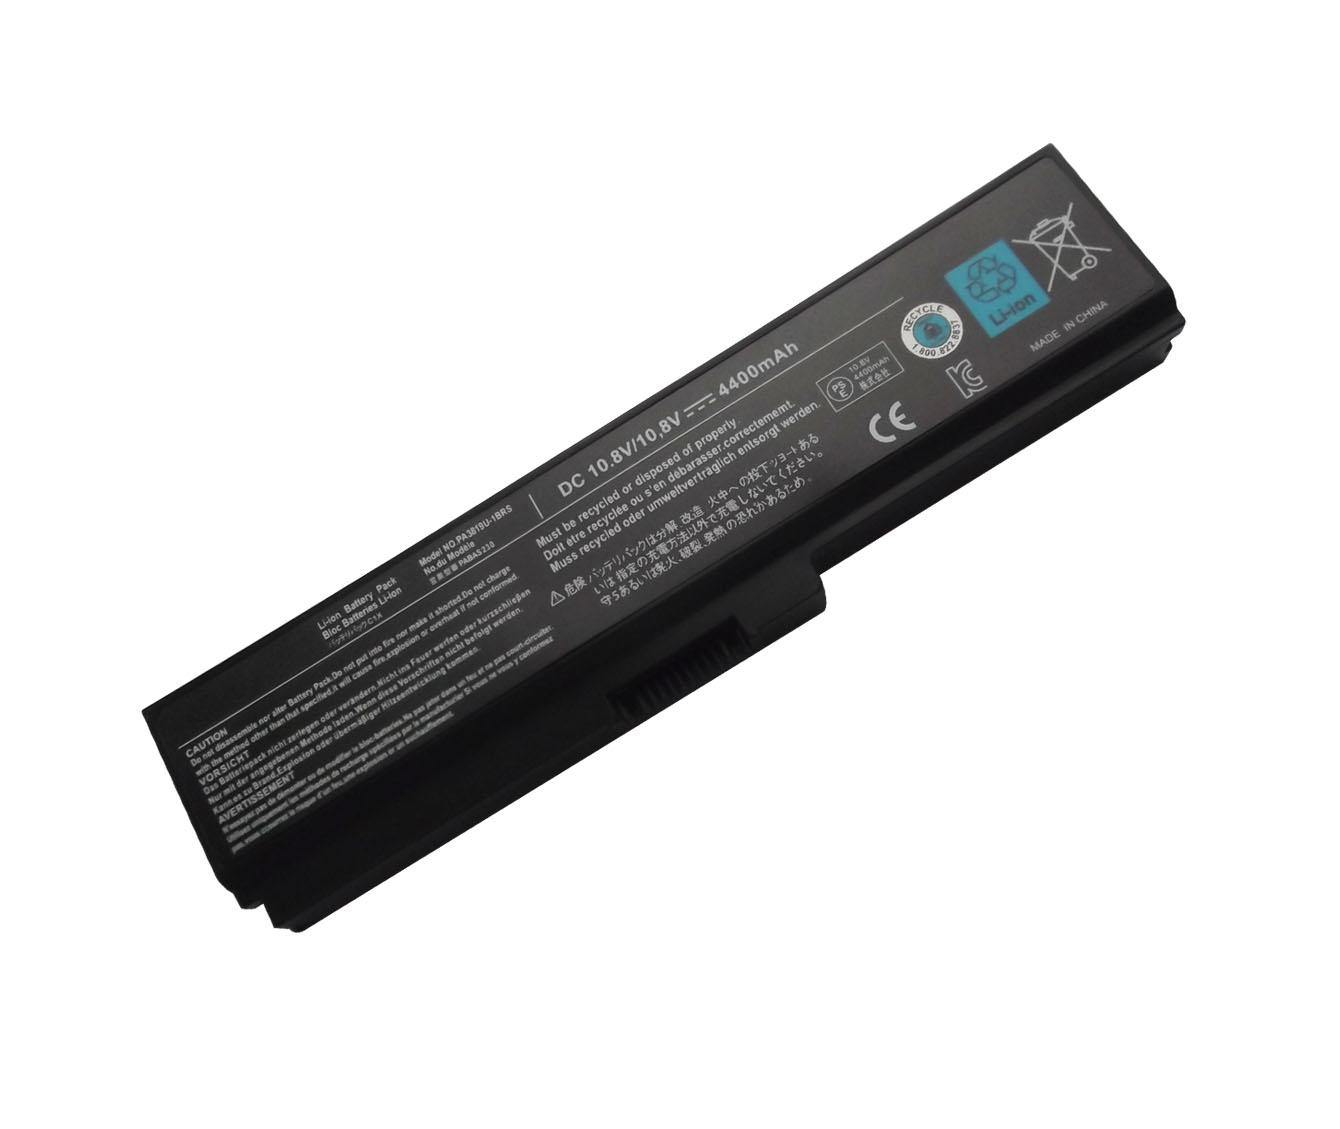 Laptop/Notebook Battery Replacement for TOSHIBA 3819 Series Battery  fits Part Number: PA3816U 1BRS PA3817U 1BRS PA3818U 1BRS PA3819U 1BRS PABAS227 PABAS228 PABAS229 PABAS230